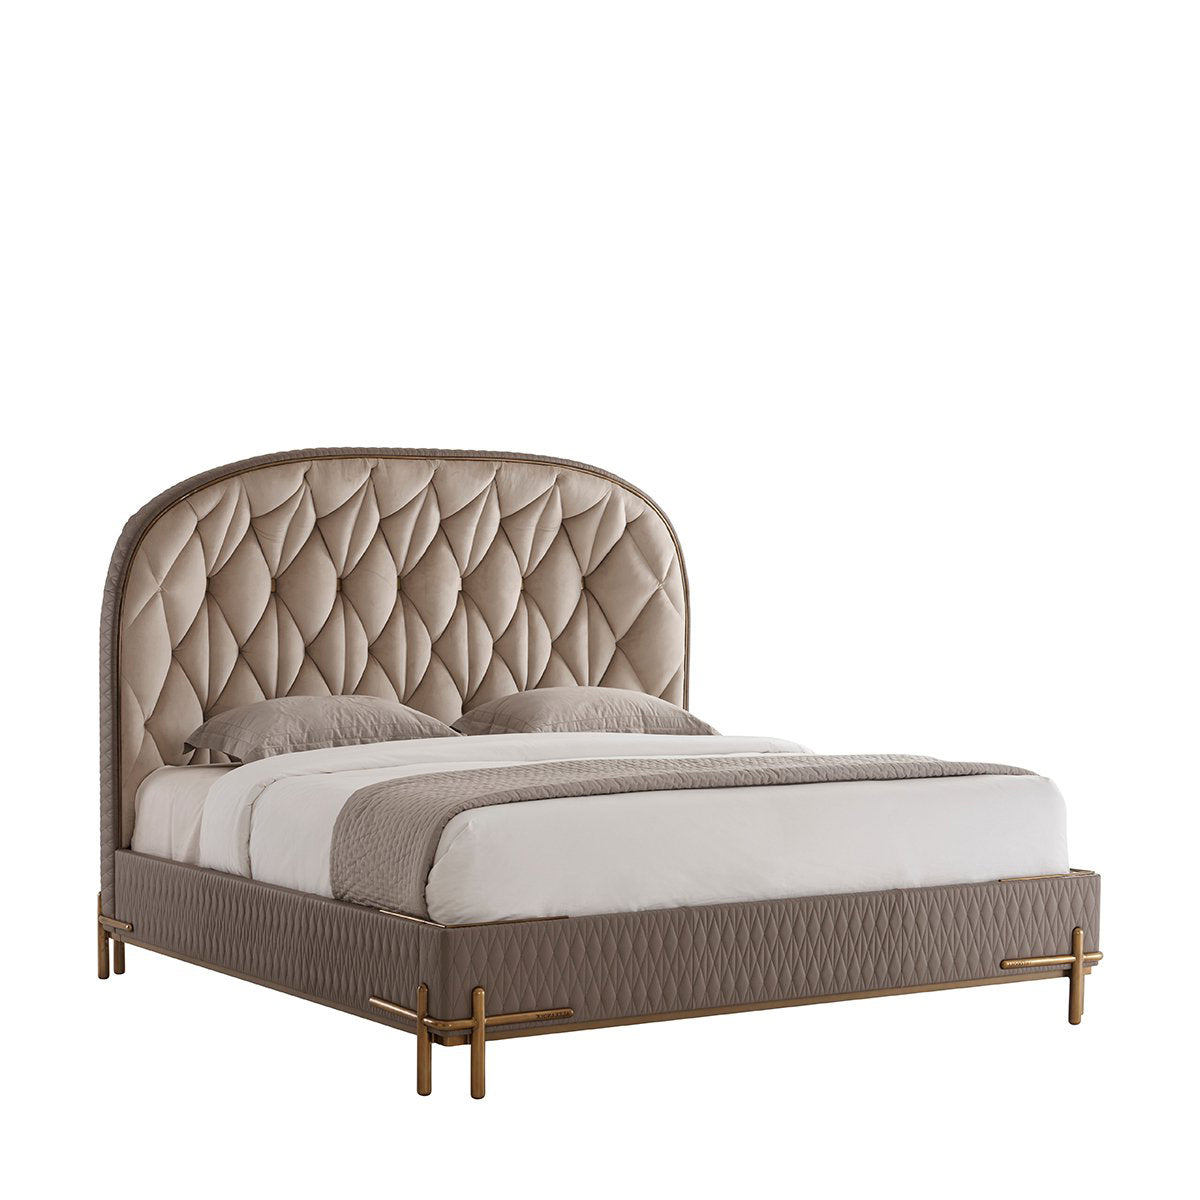 theodore alexander iconic upholstered us king bed beds 